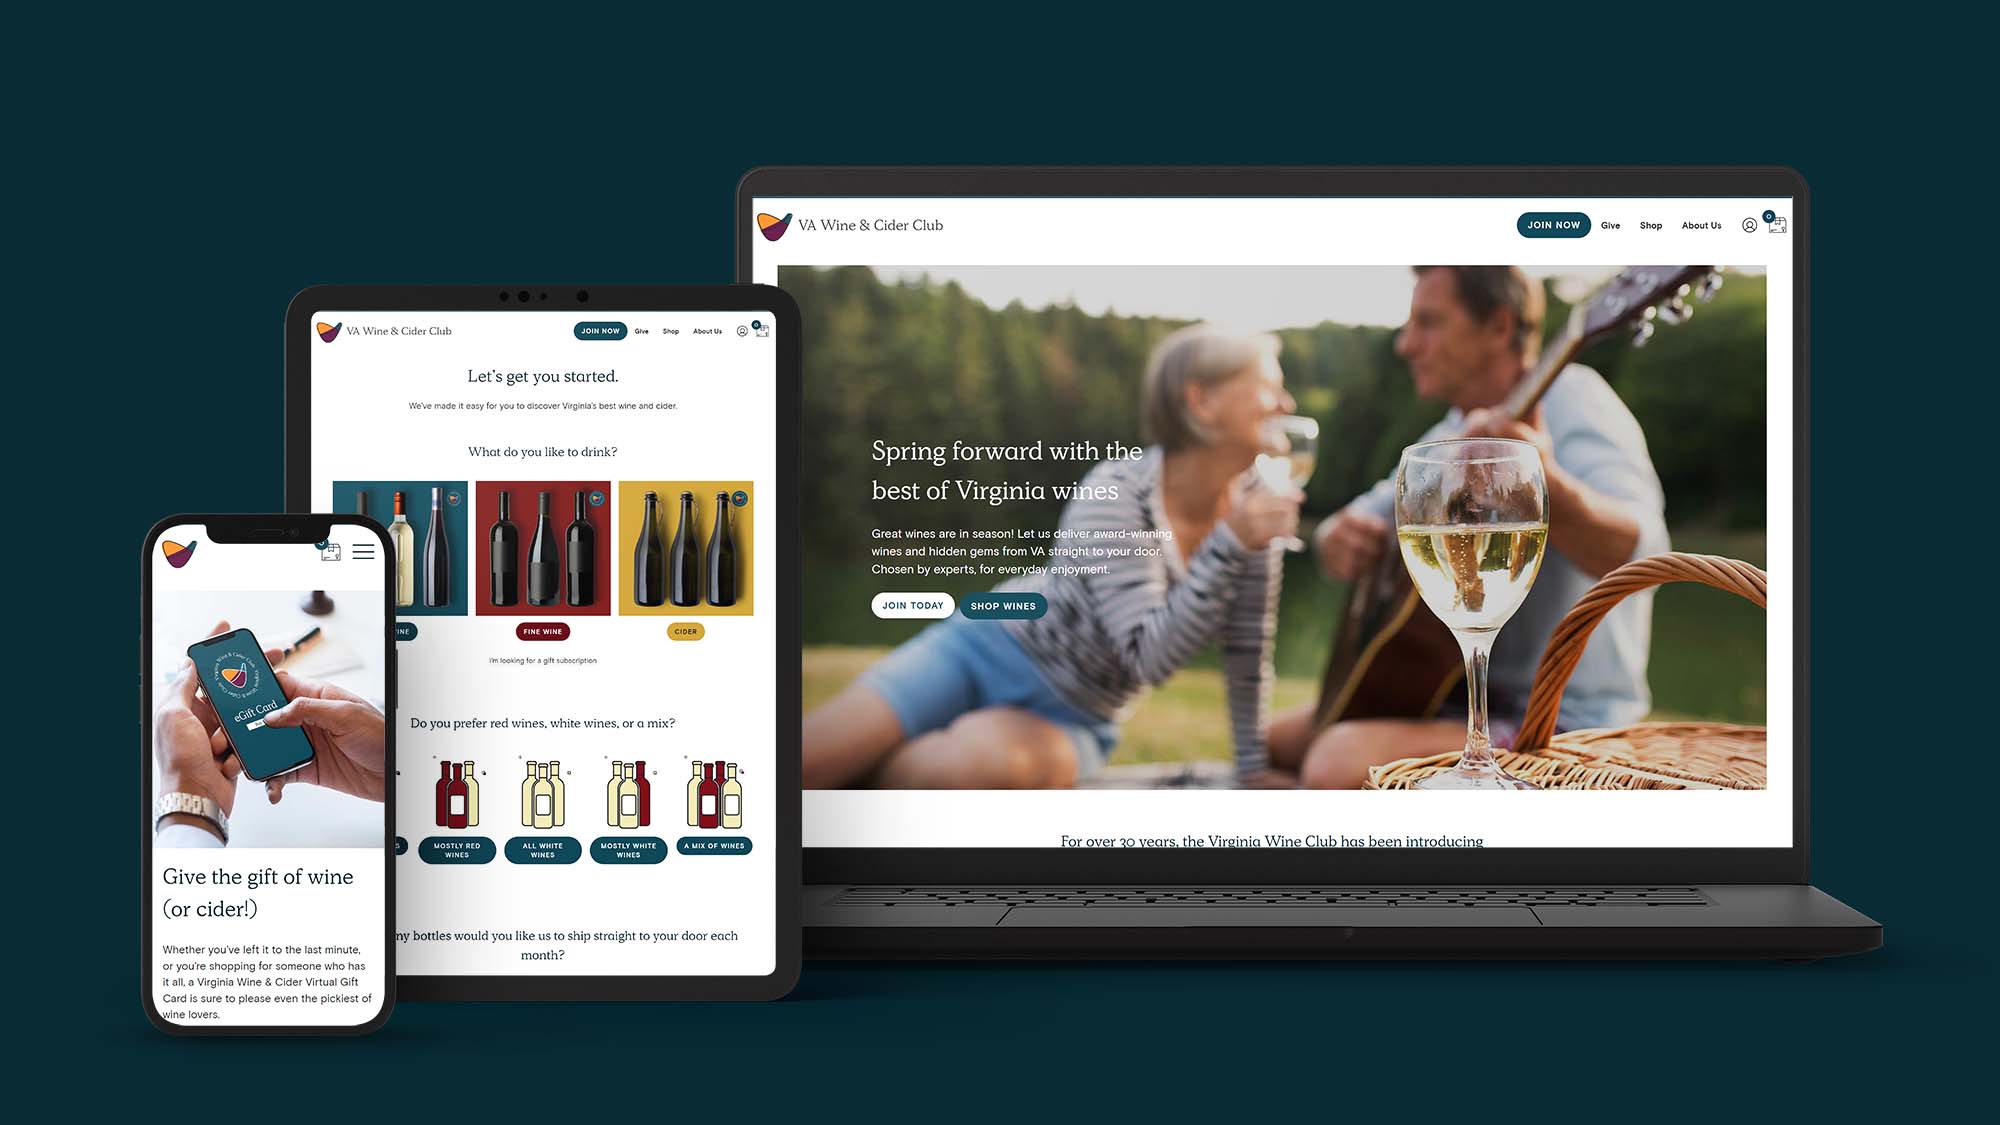 Mockup showing the Virginia Wine Club website on 3 devices to demonstrate responsiveness